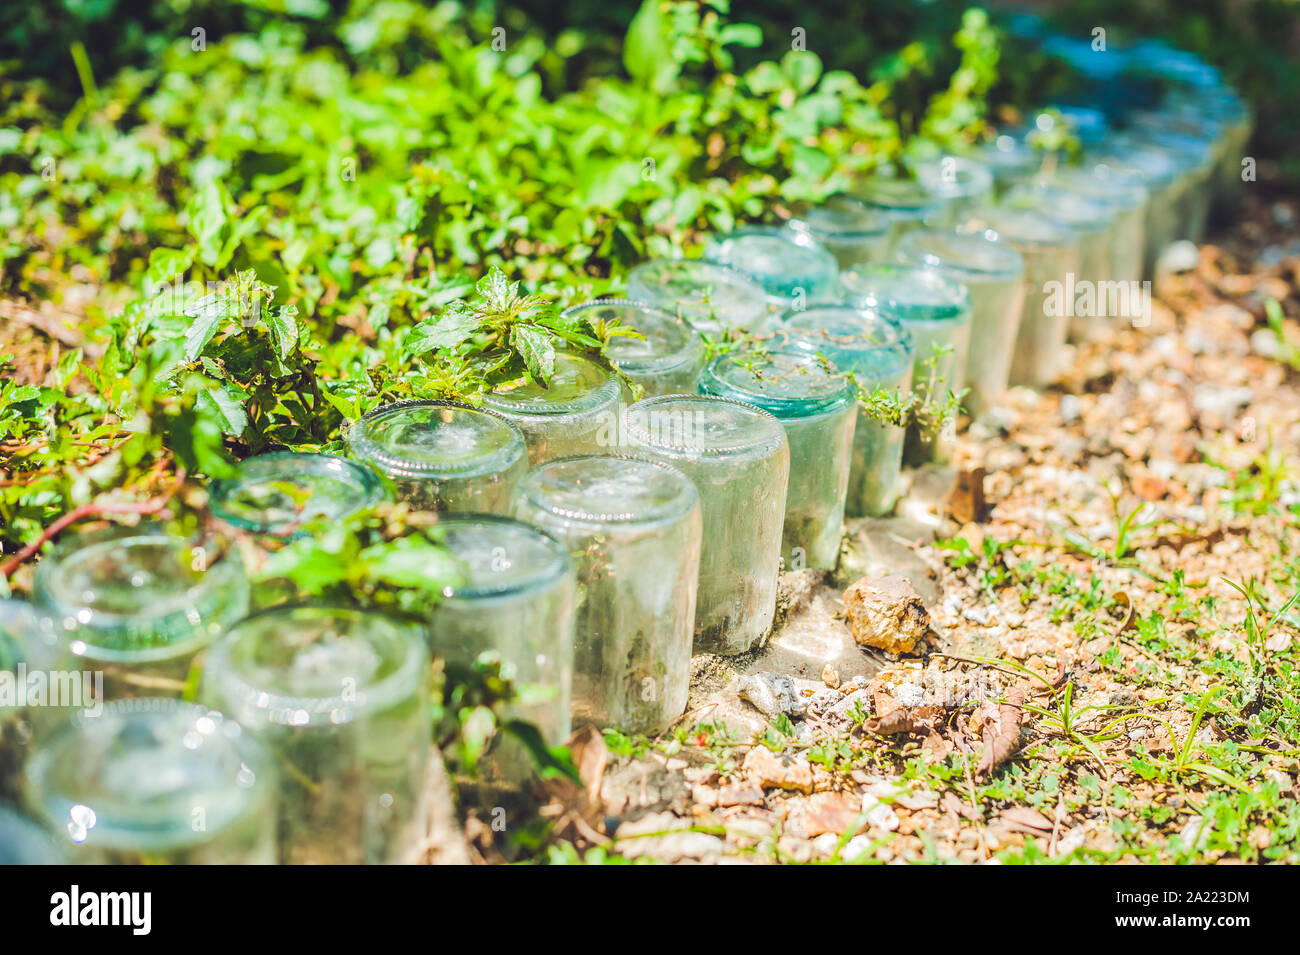 A fence made of glass jars. Stock Photo